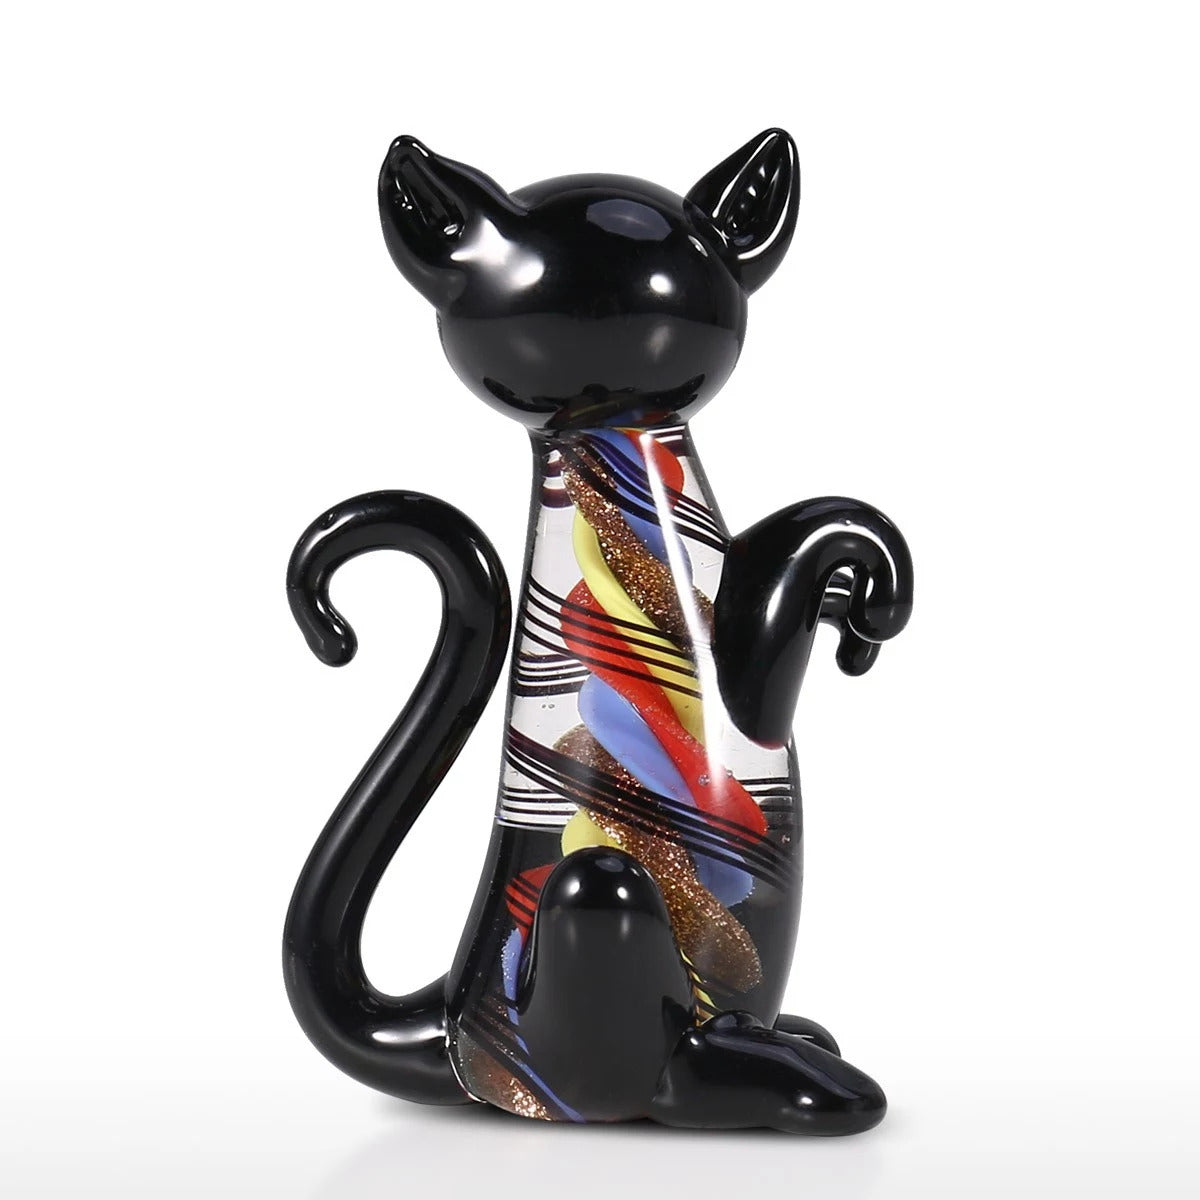 Blown Glass Ornaments Sculpture with Cat Figurines